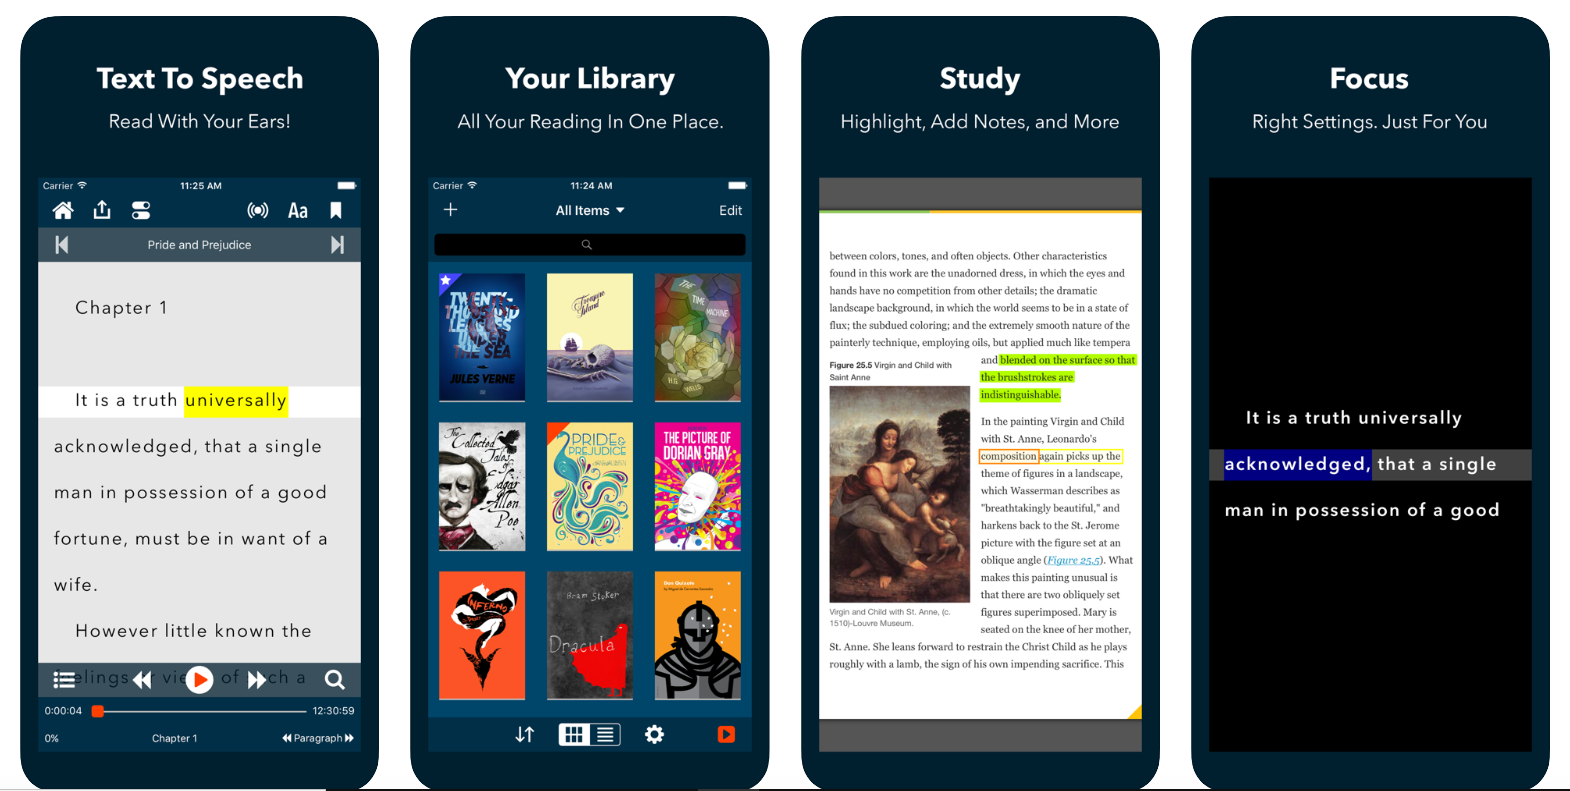 Voice Dream Reader app features, text to speech, library, study and focus.